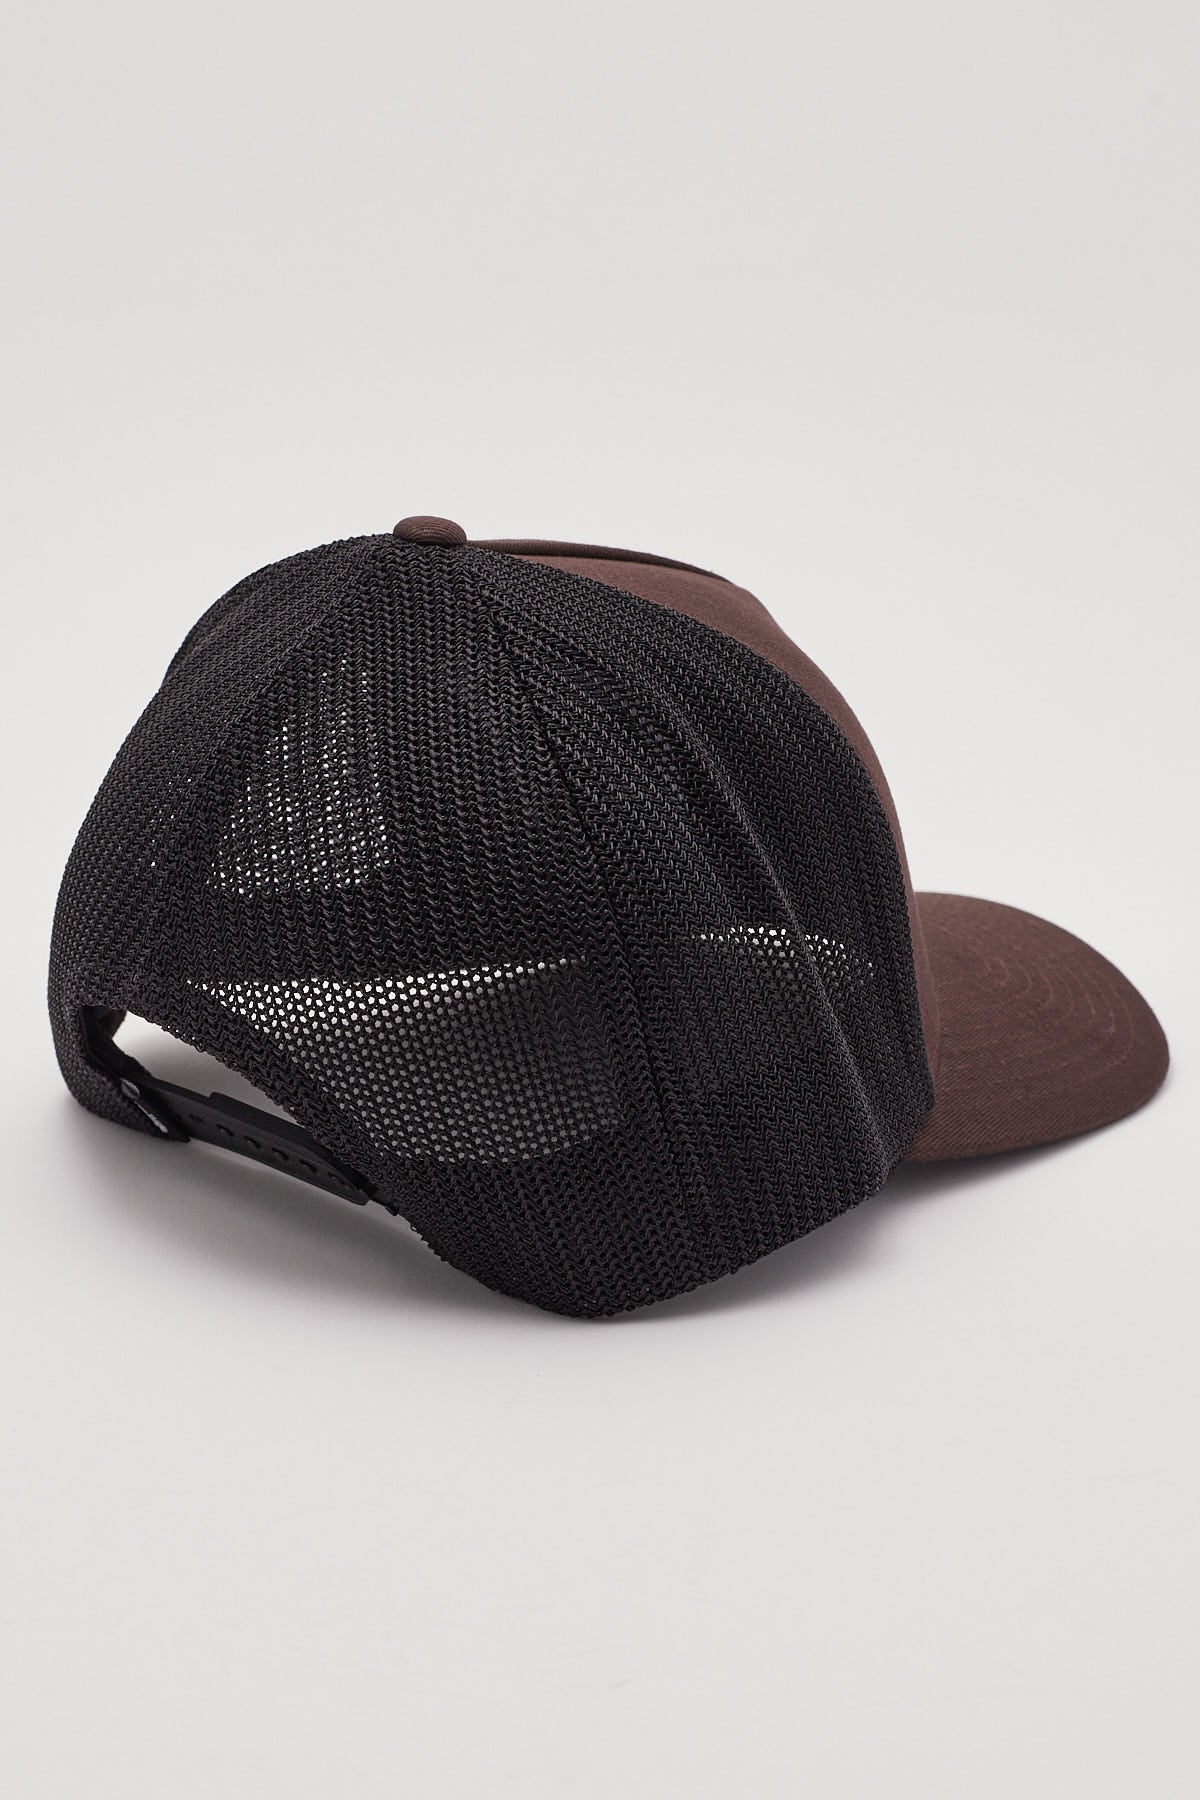 The North Face Keep It Patched Structured Trucker Coal Brown